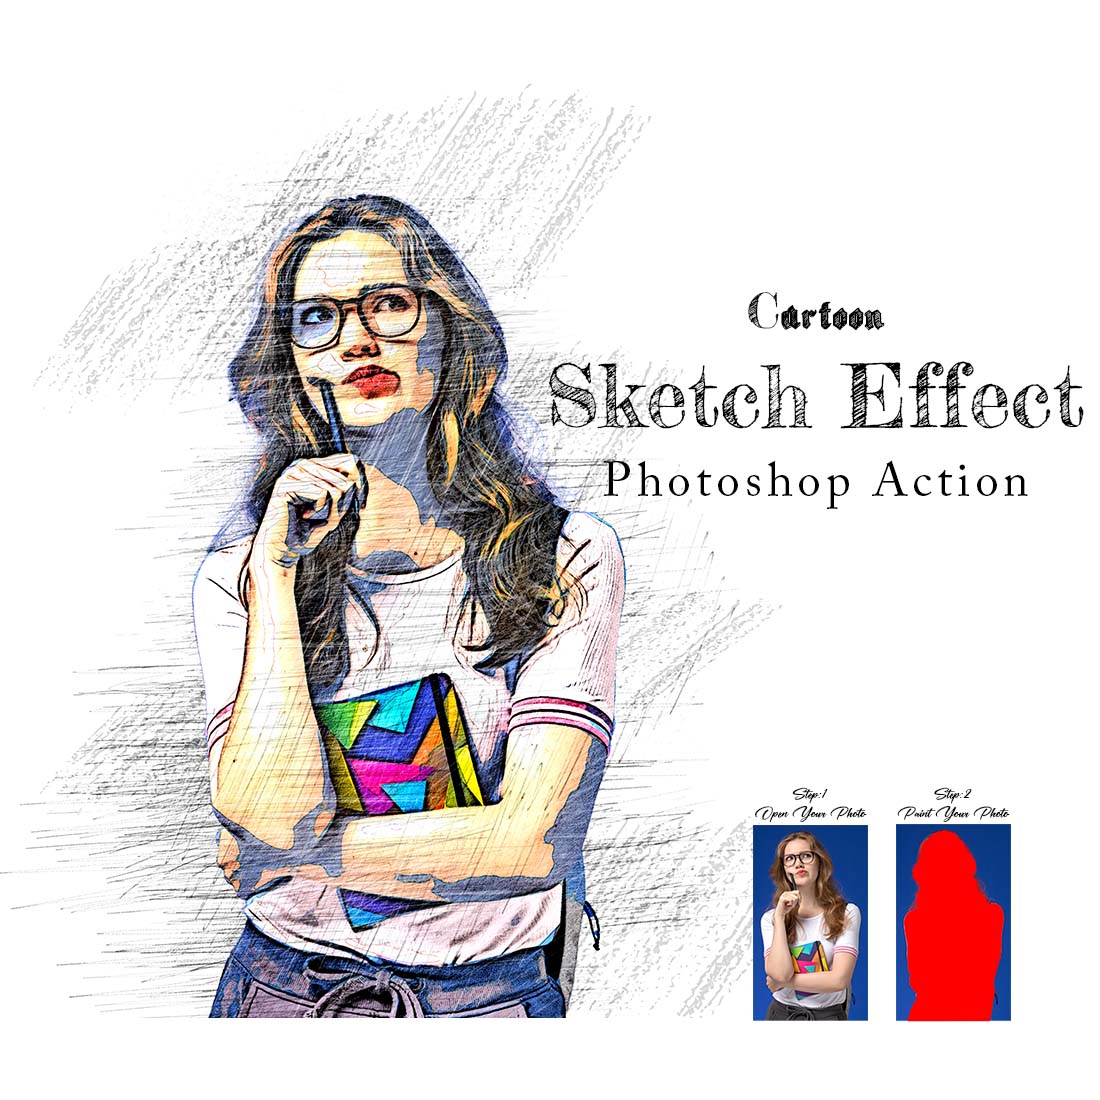 Cartoon Sketch Effect Photoshop Action cover image.